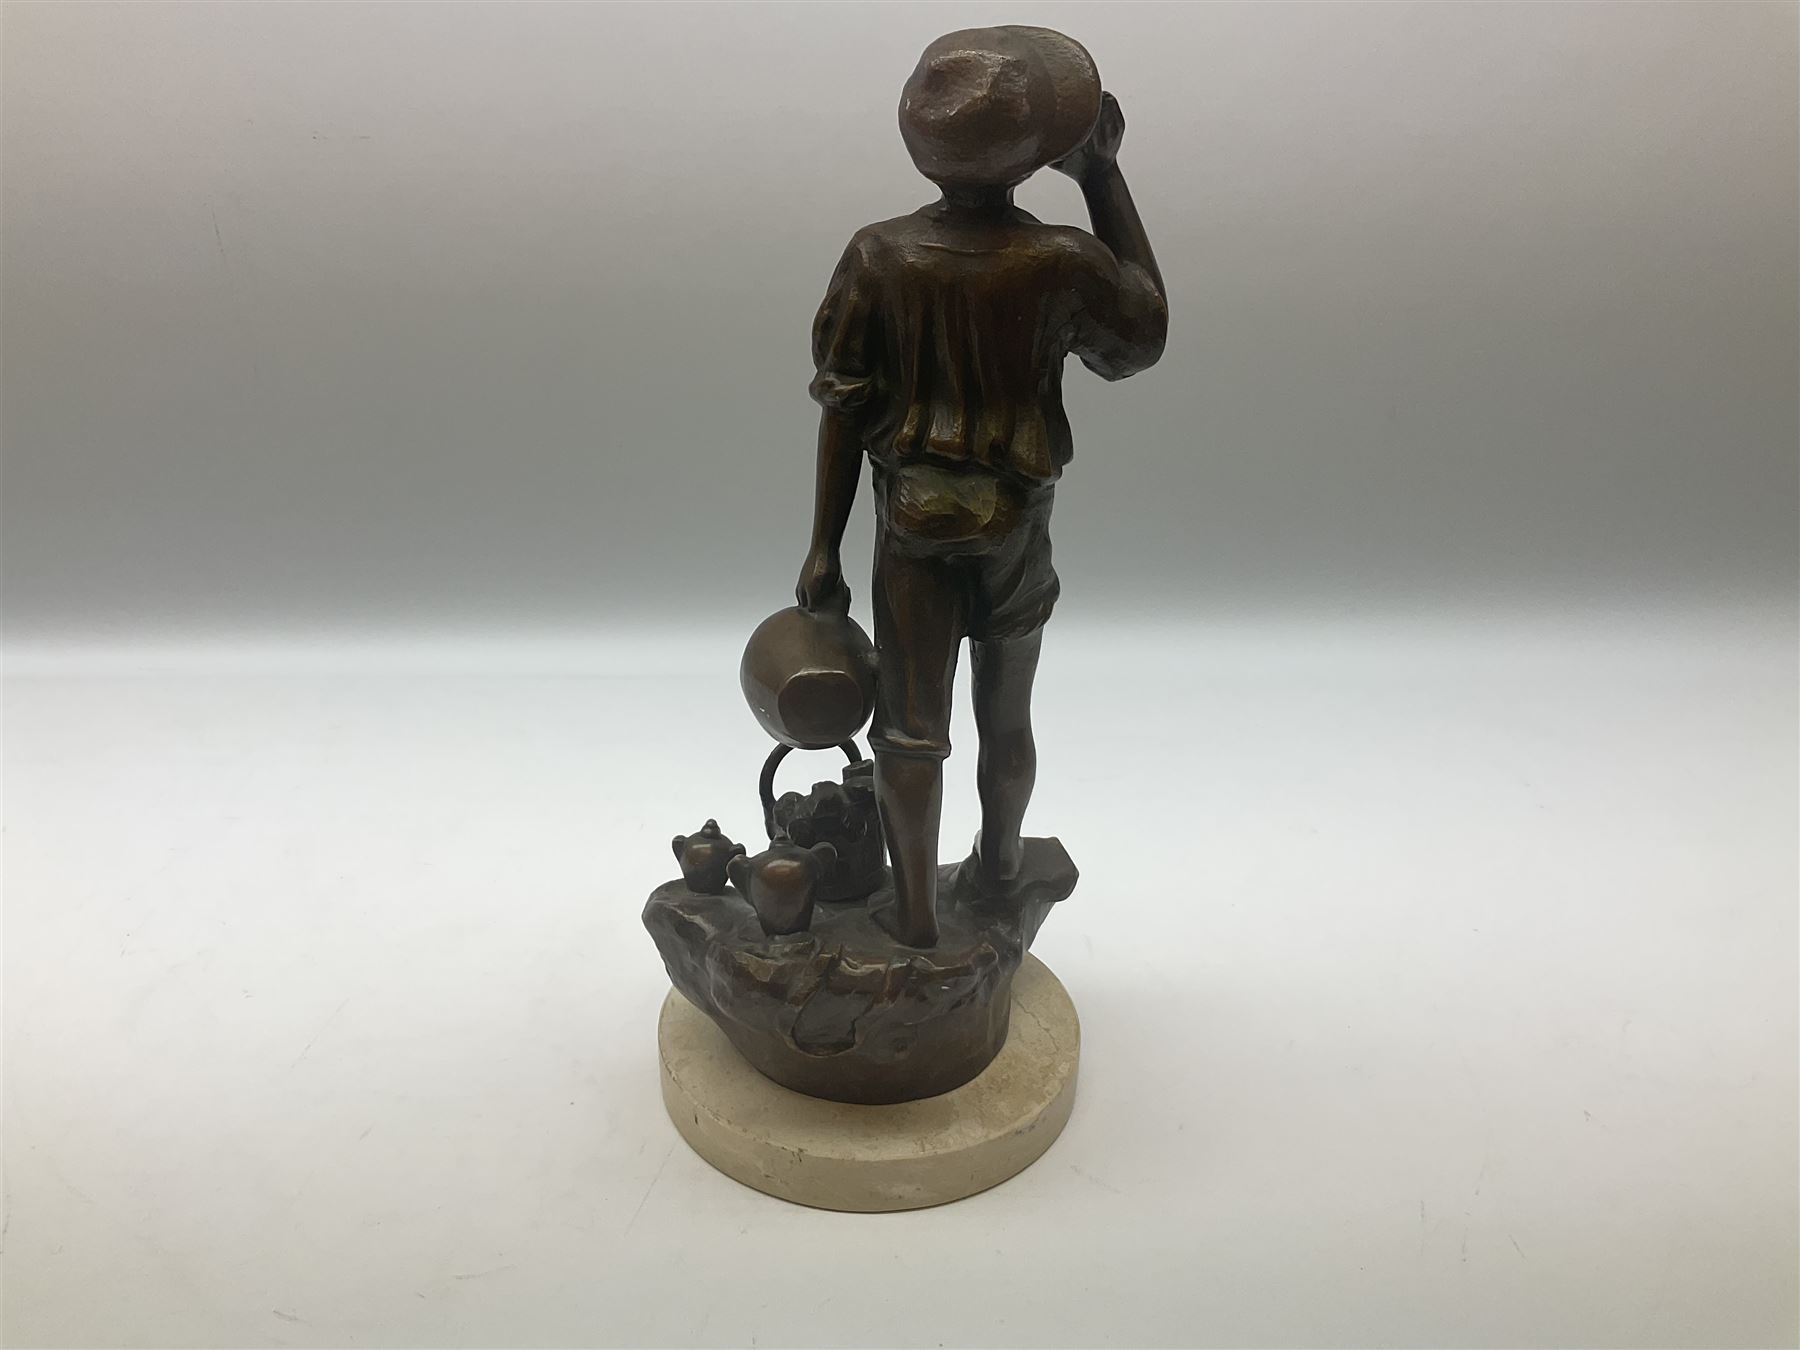 Spelter figure of a boy shouting on a stone base - Image 4 of 8